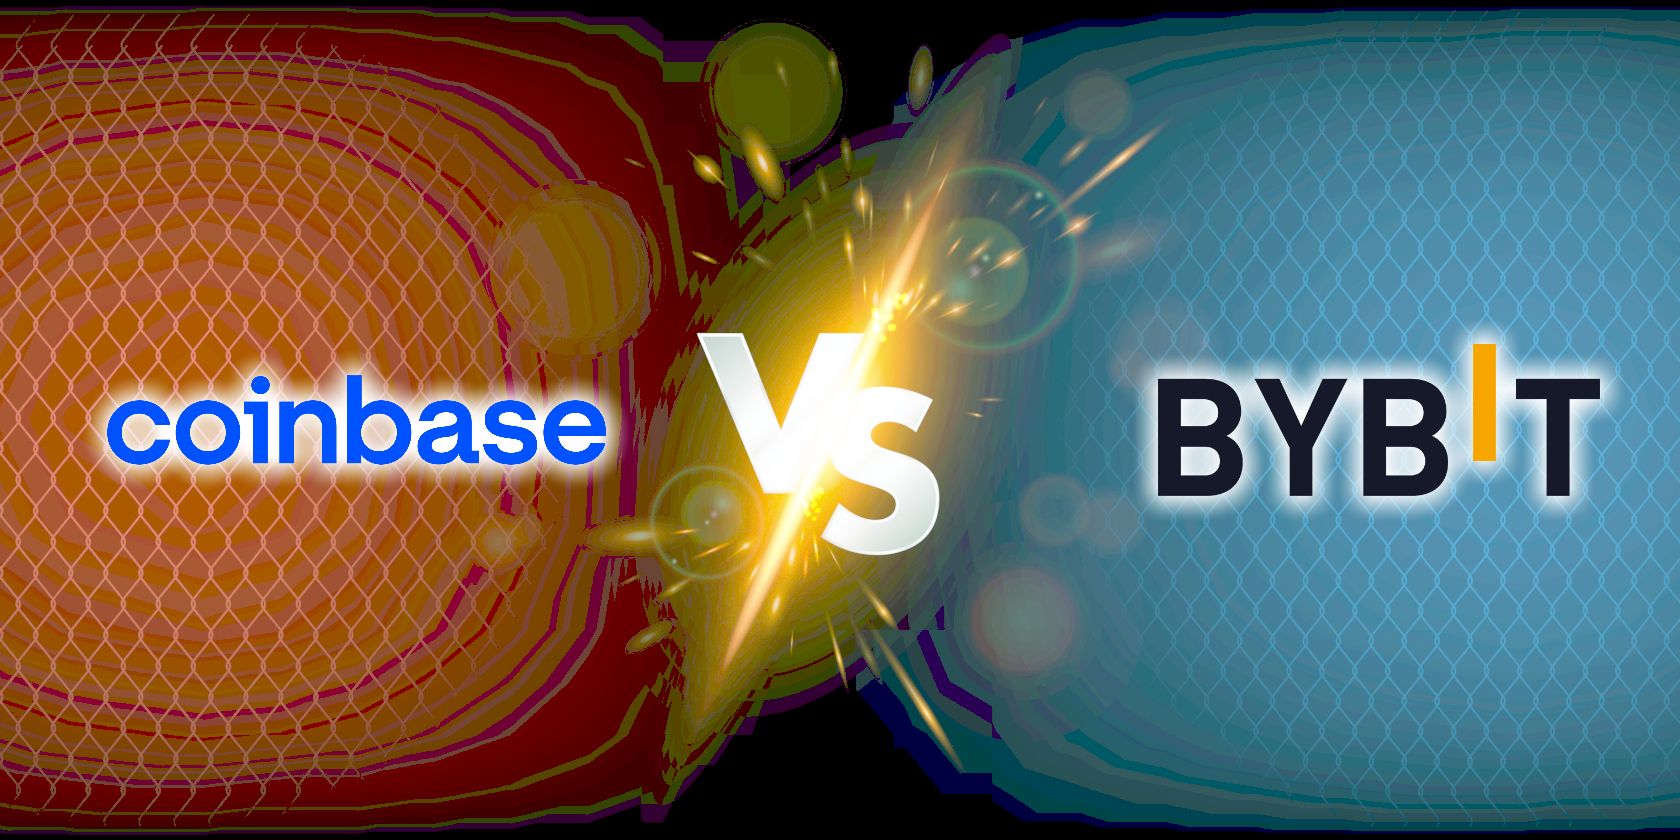 Coinbase vs. Bybit: Which Is Better?